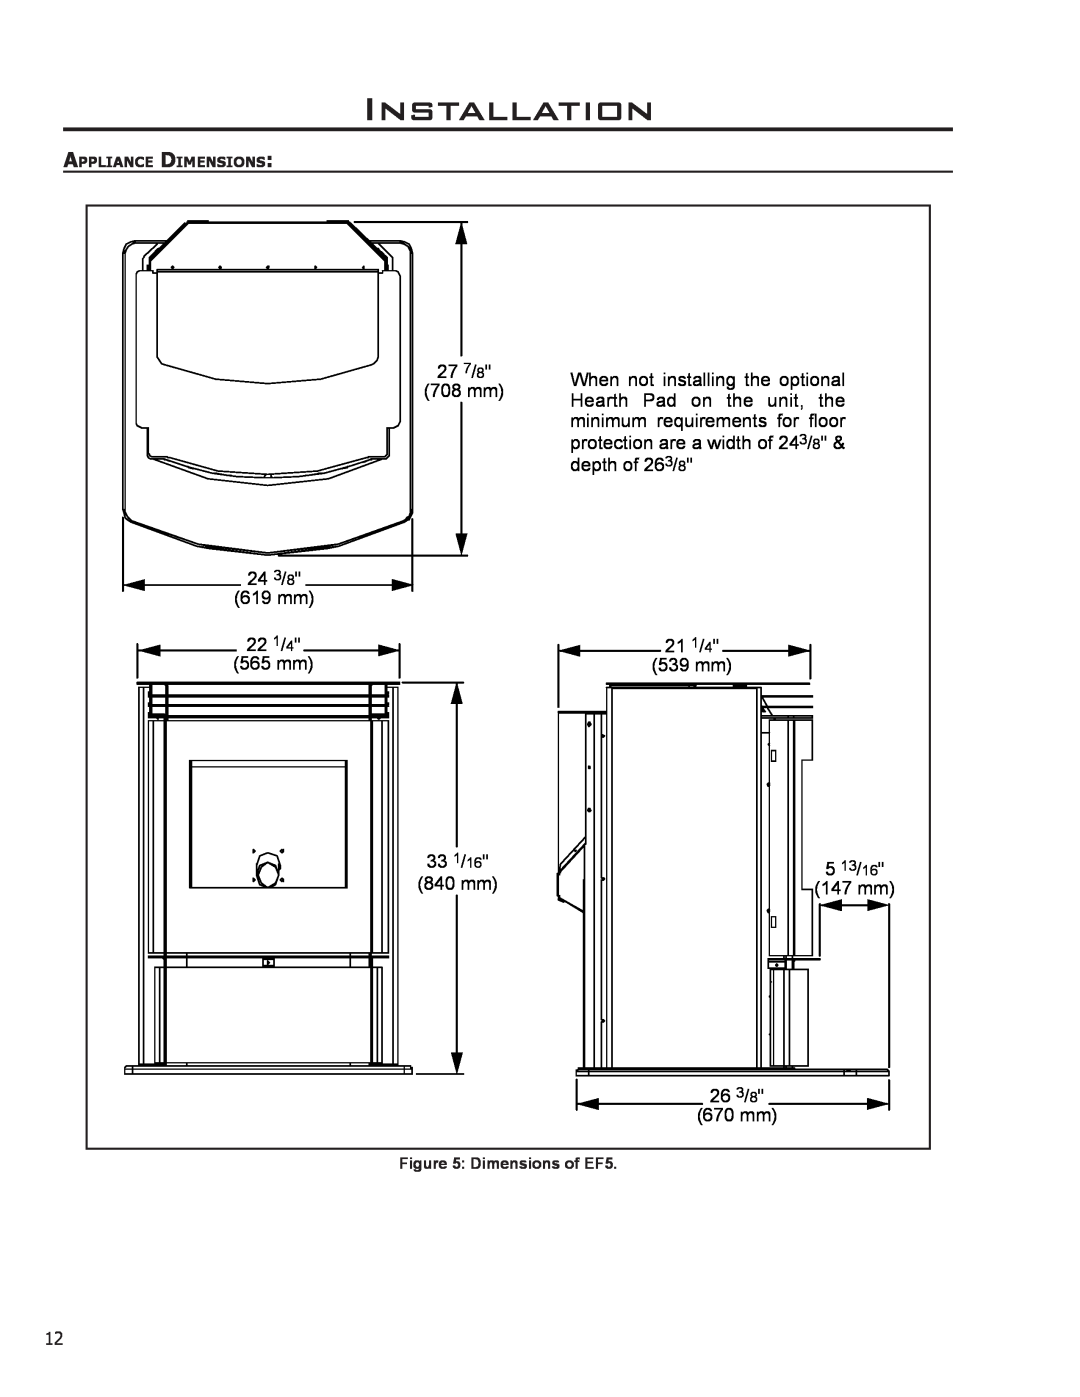 Enviro C-11023 owner manual Installation, Dimensions of EF5, Appliance Dimensions 